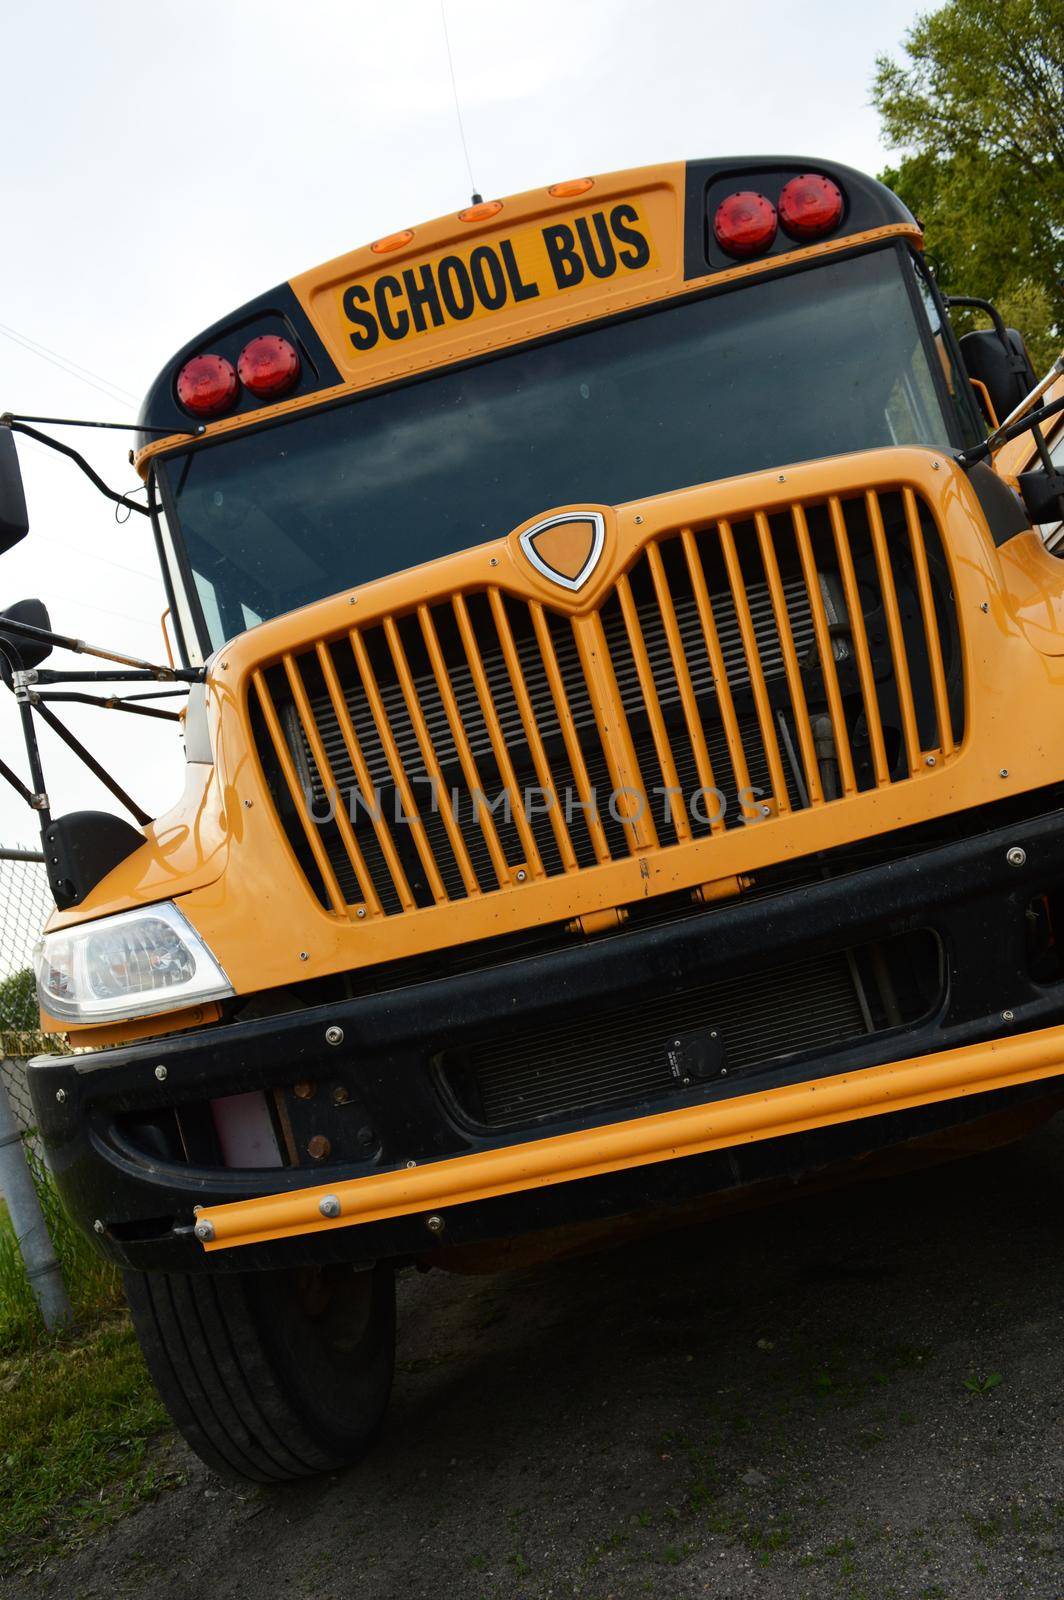 A low angle school bus shot from the front during the daytime.